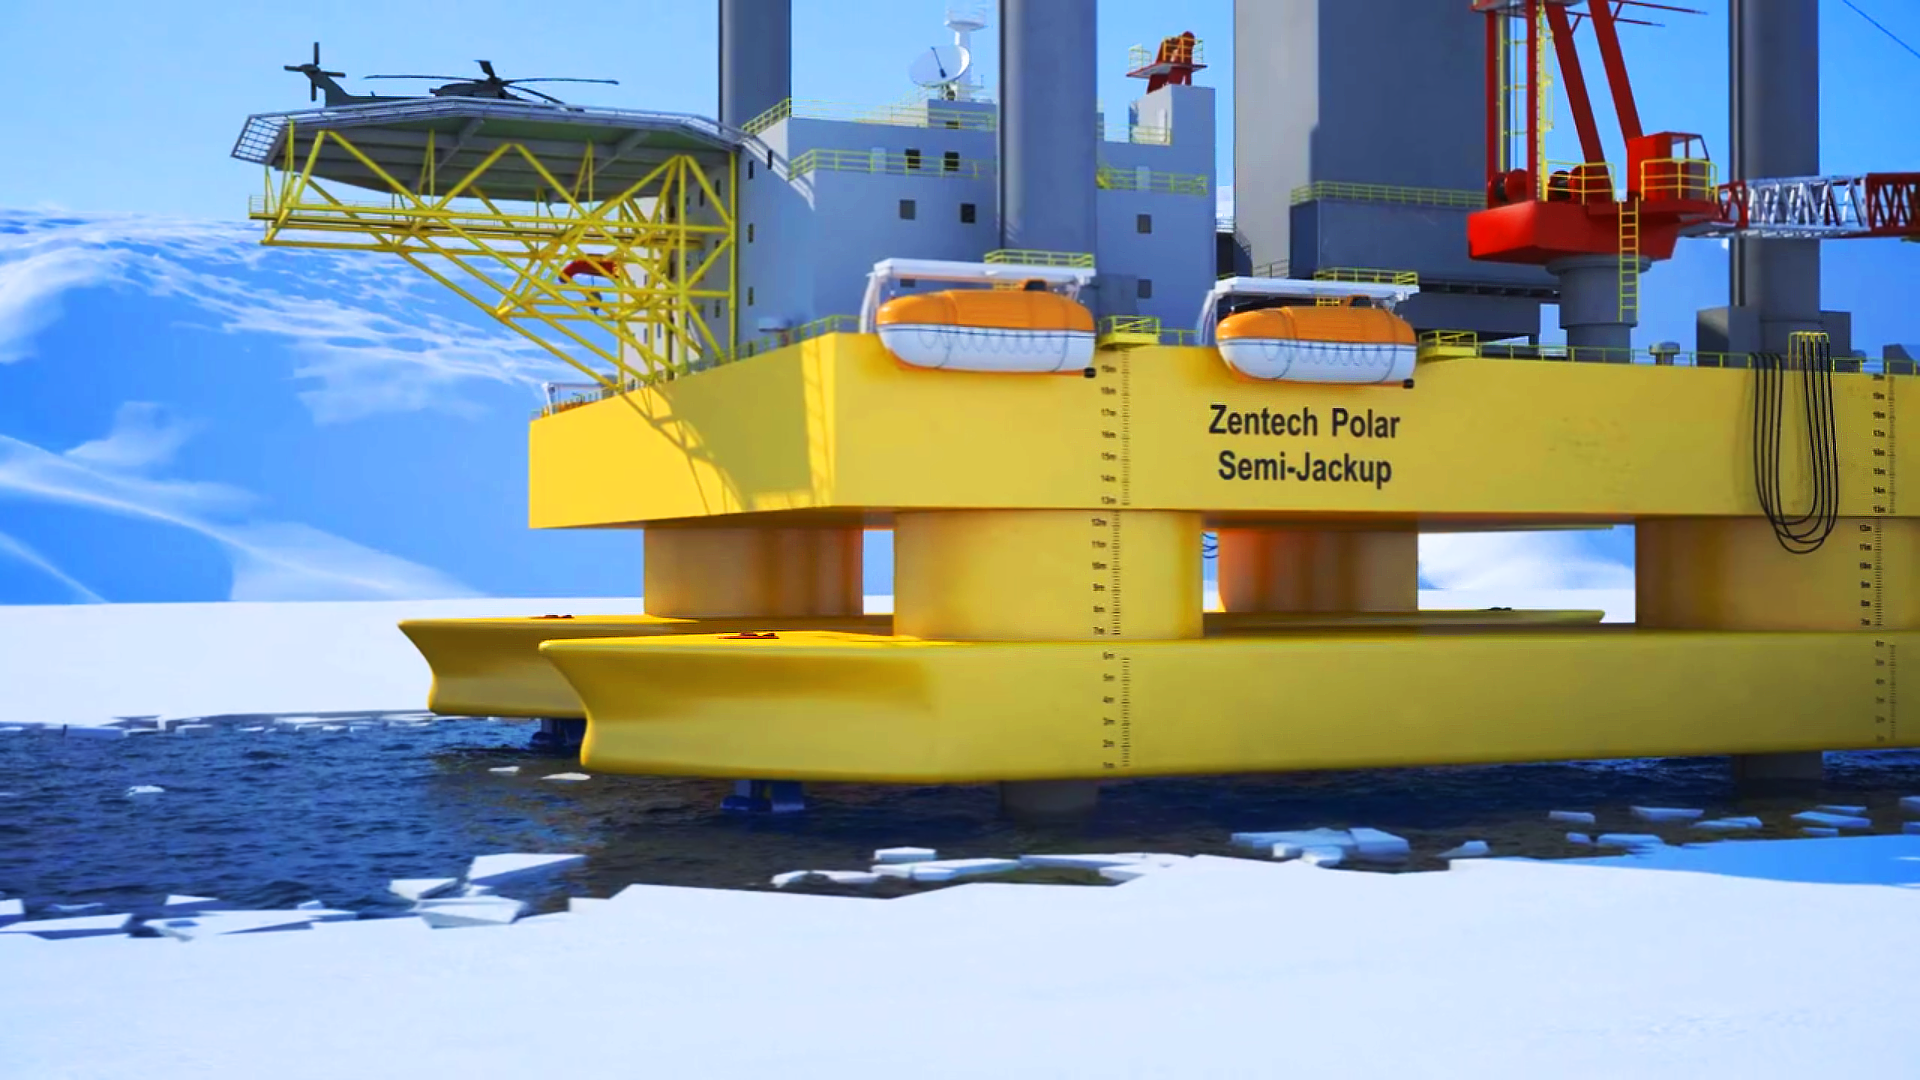 his image displays the 3D rendered  Zentech Arctic Oil Rig that Trinity artist created for there animation demonstrating offshore technology.  This image displays a close ground shot as if someone was taking a photograph from the ice beside it.